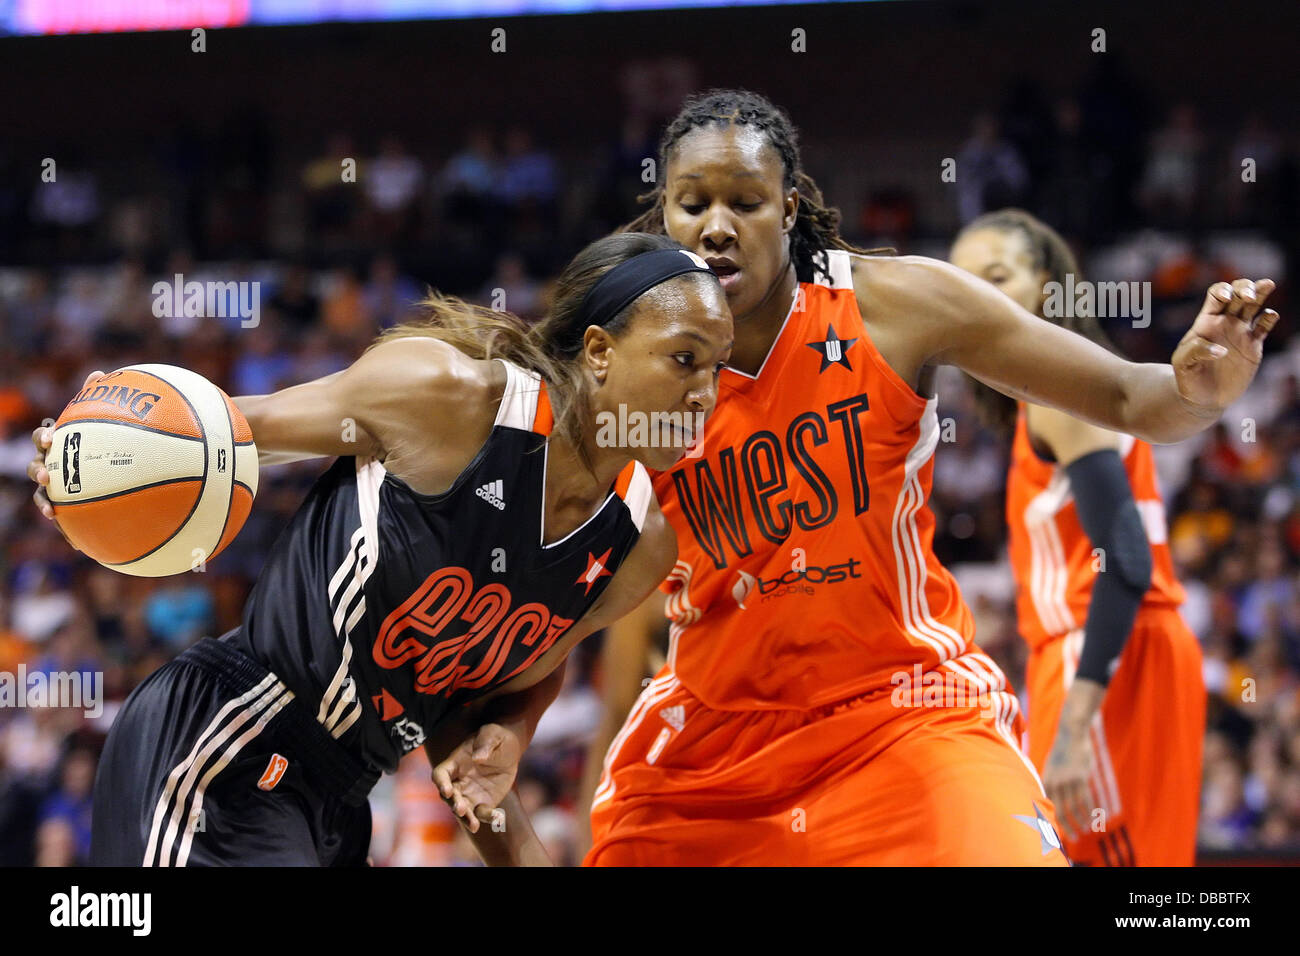 Uncasville, Connecticut, USA. 27th July, 2013. Eastern Conference forward Tamika Catchings (24) of the Indiana Fever drives to the basket against Western Conference forward Rebekkah Brunson (32) of the Minnesota Lynx during the 2013 WNBA All-Star game at Mohegan Sun Arena. The Western Conference defeated the East 102-98. Anthony Nesmith/CSM/Alamy Live News Stock Photo